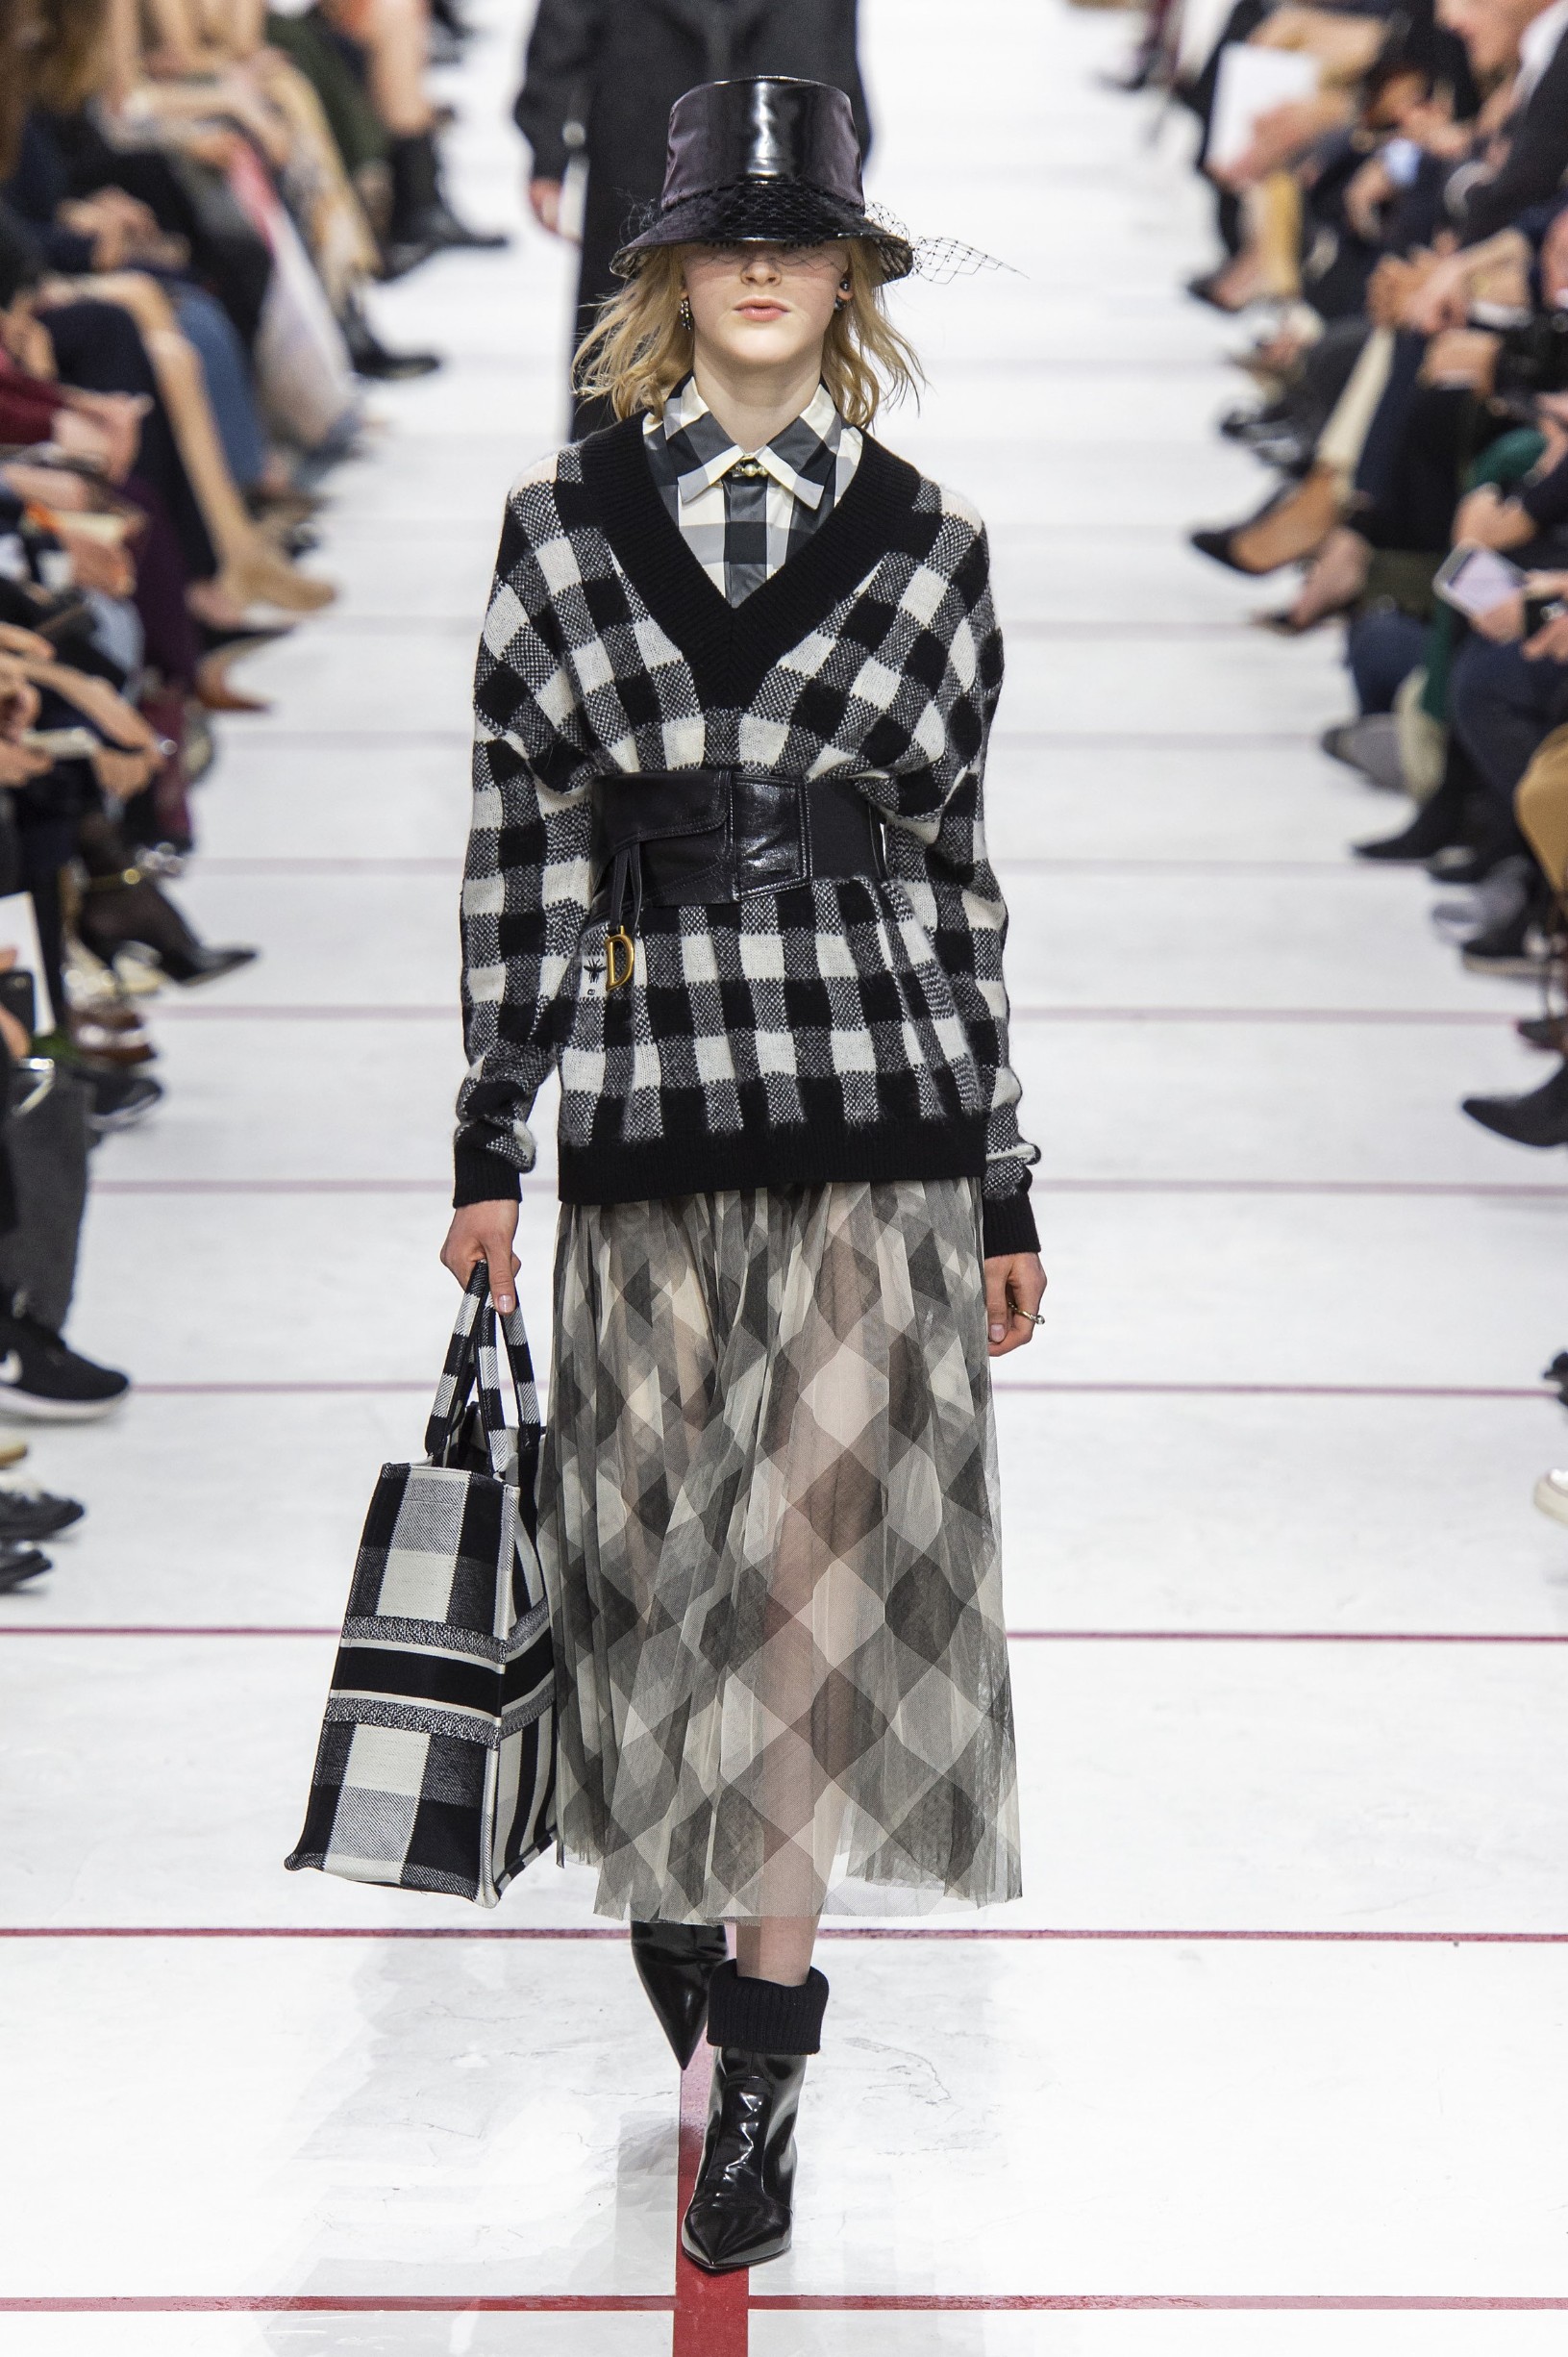 Christian Dior
Paris Fashion Week Autumn Winter 2019, RTW Fall 2019 fashion show
Paris, France, March 2019, Image: 418734925, License: Rights-managed, Restrictions: , Model Release: no, Credit line: Rick Gold / Capital pictures / Profimedia